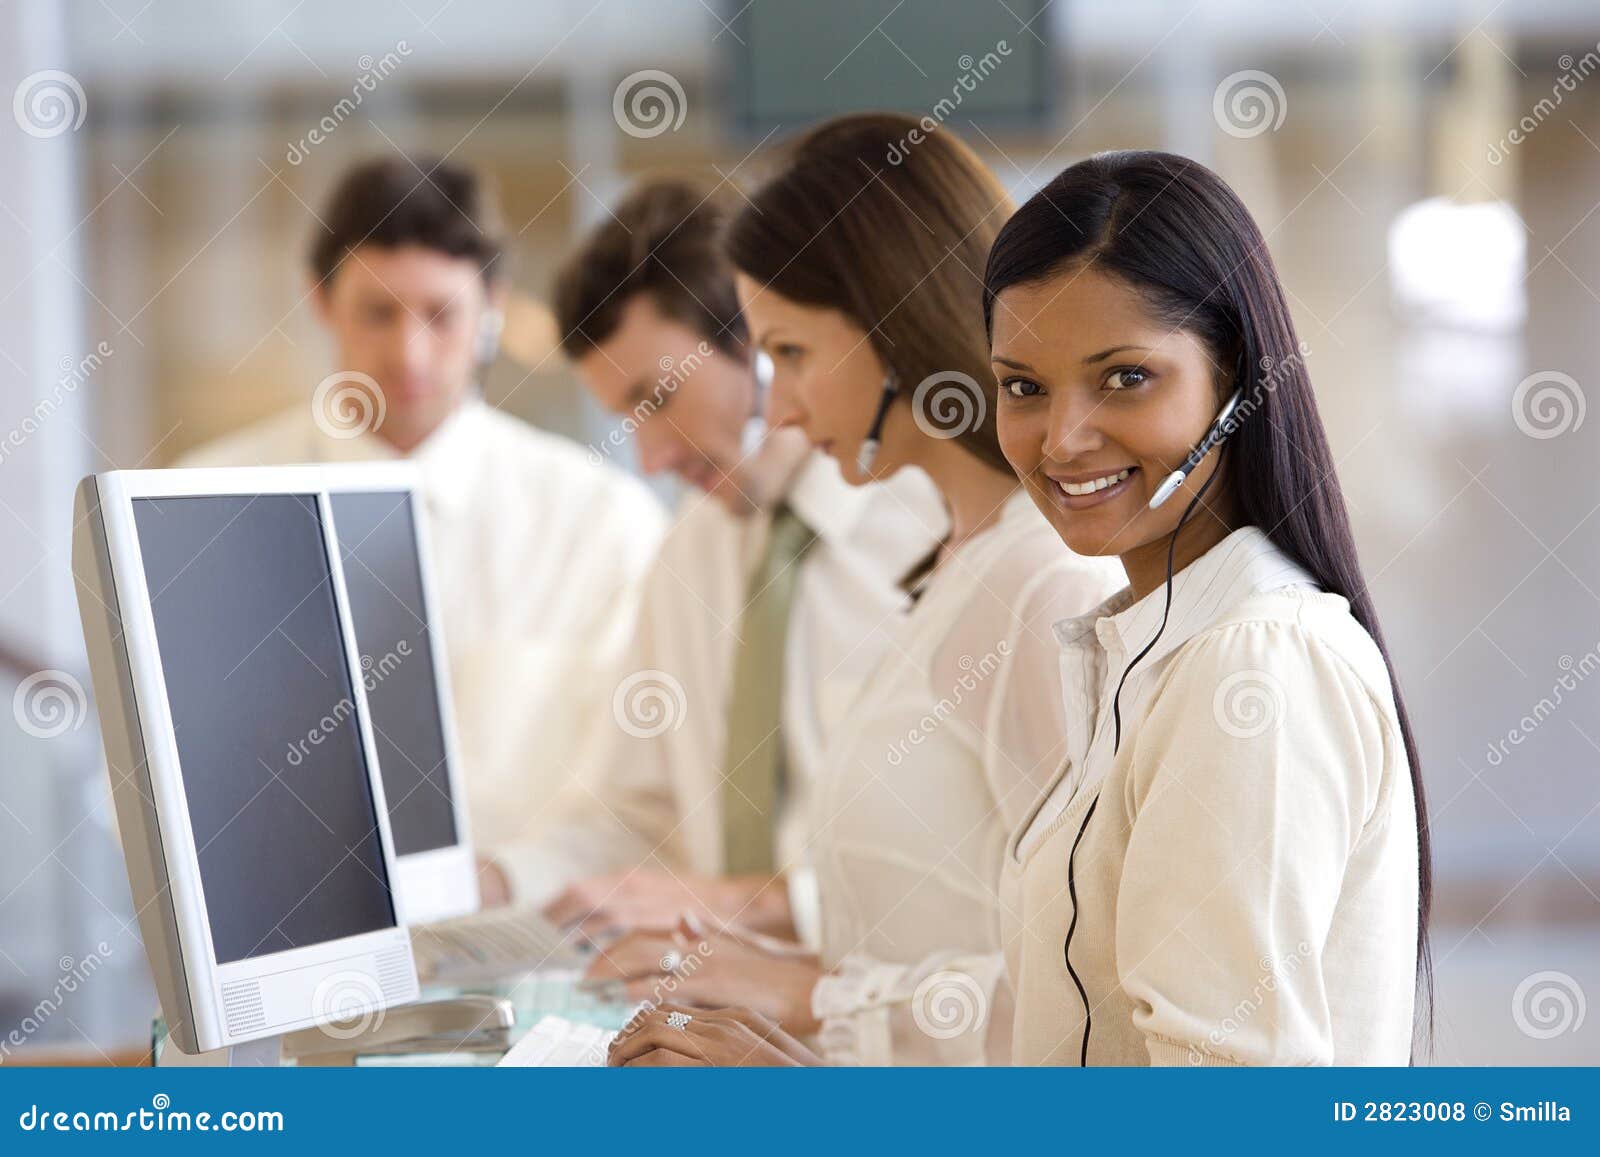 call center with smiling woman